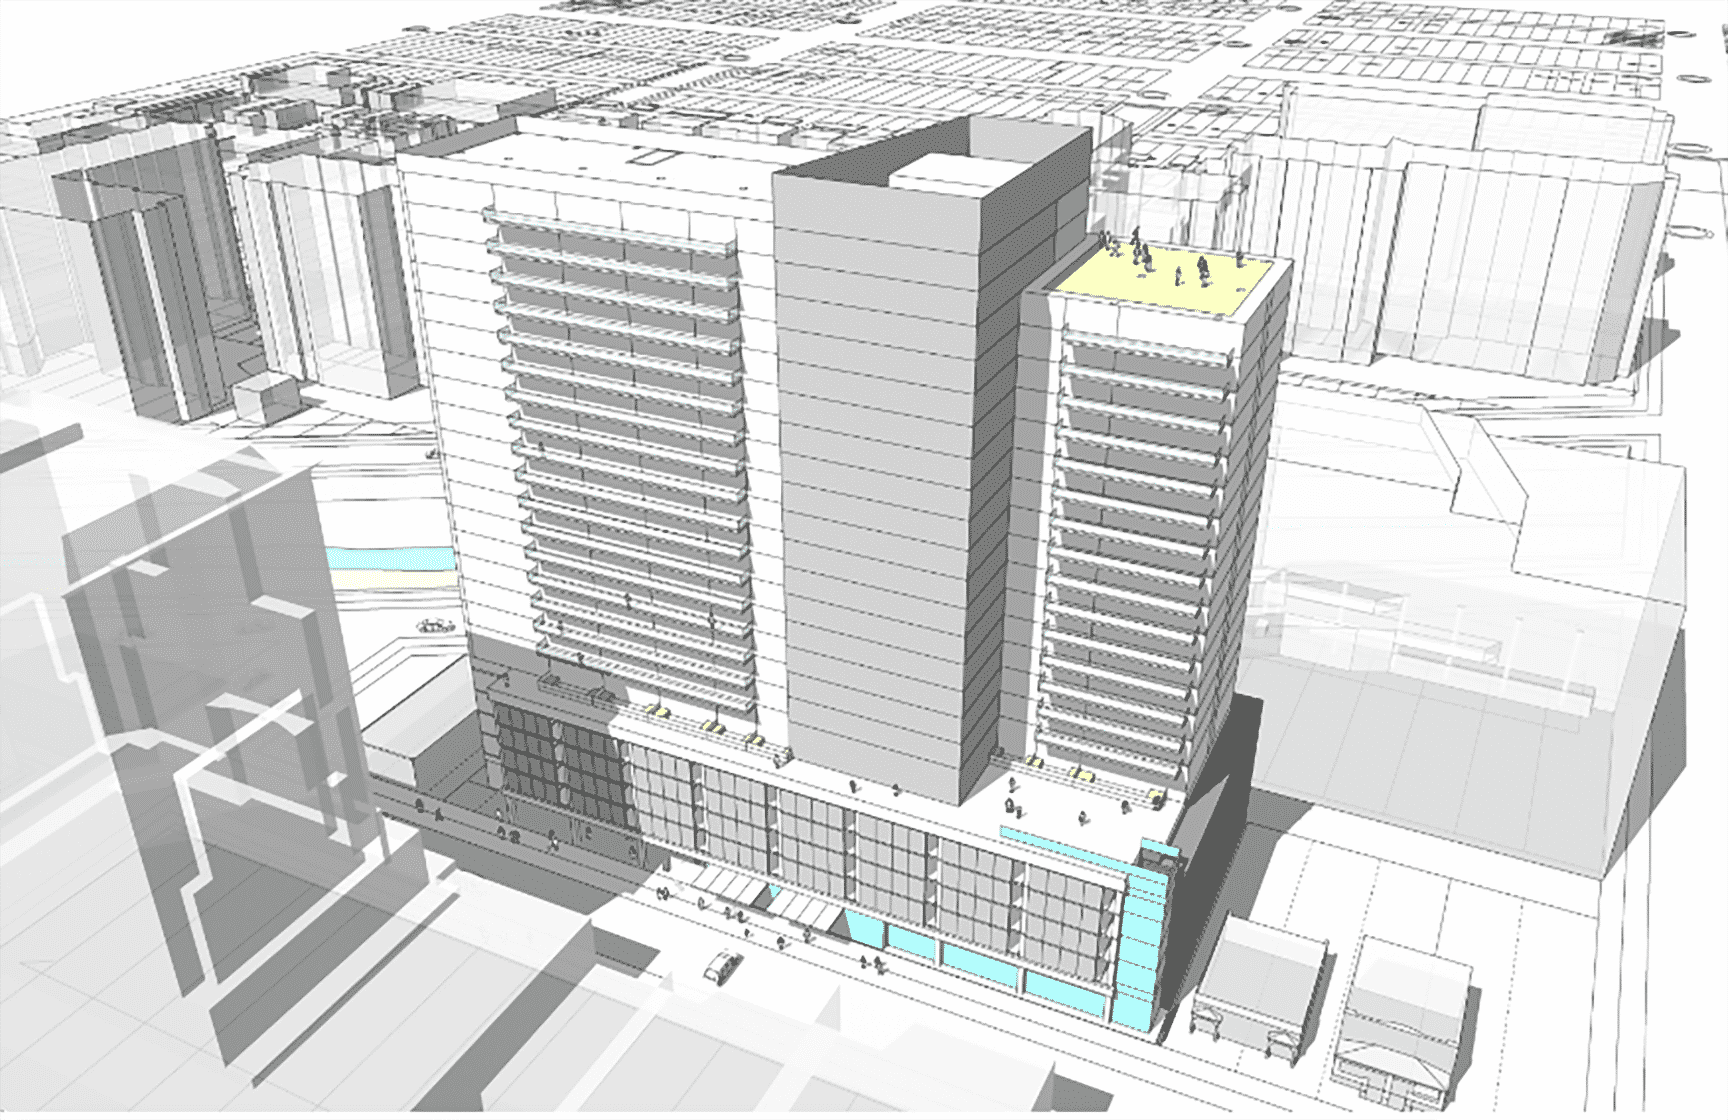 23-story apartment building planned in Denver